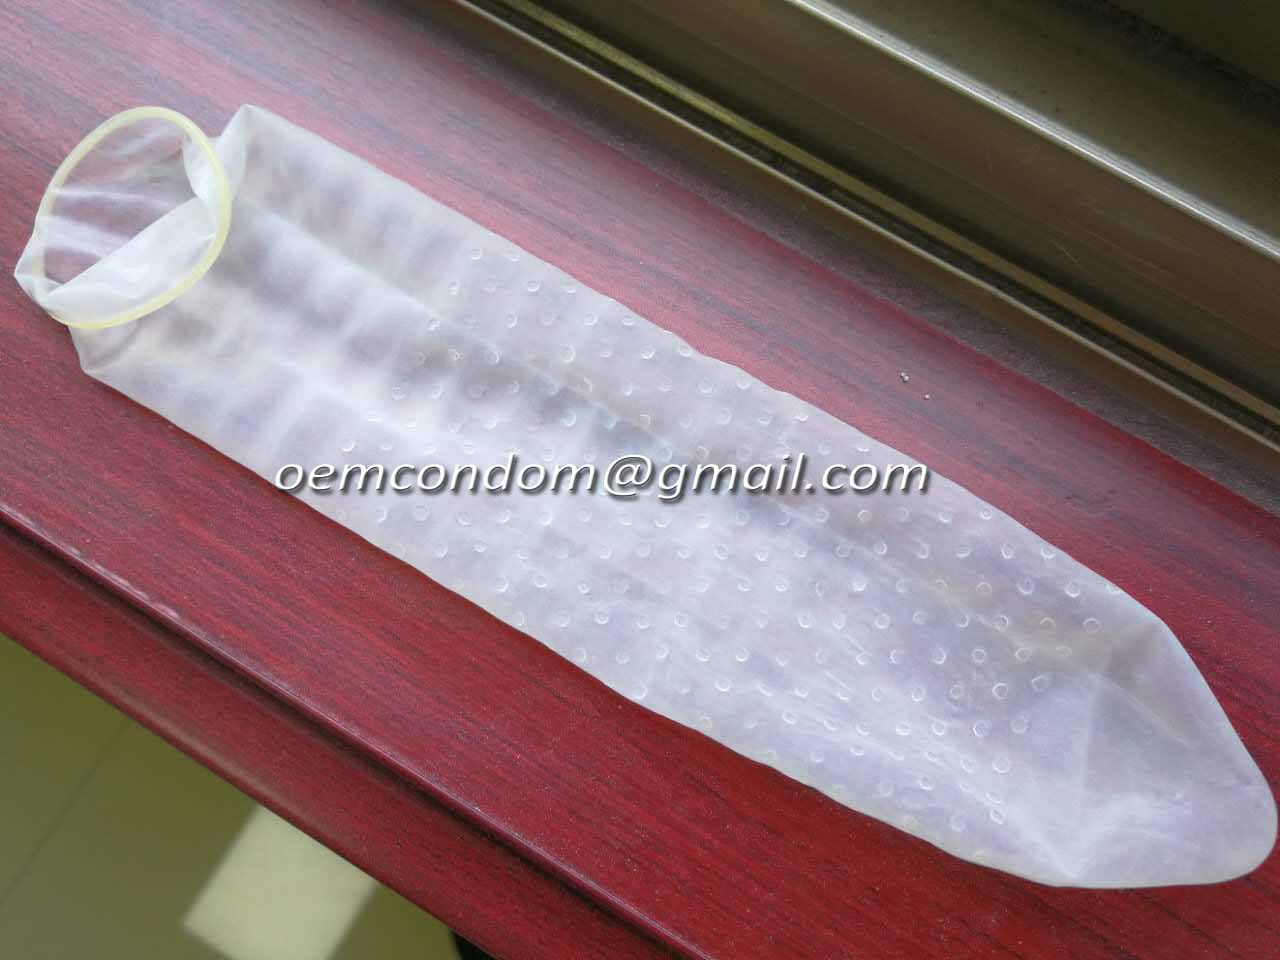 extra dotted condoms